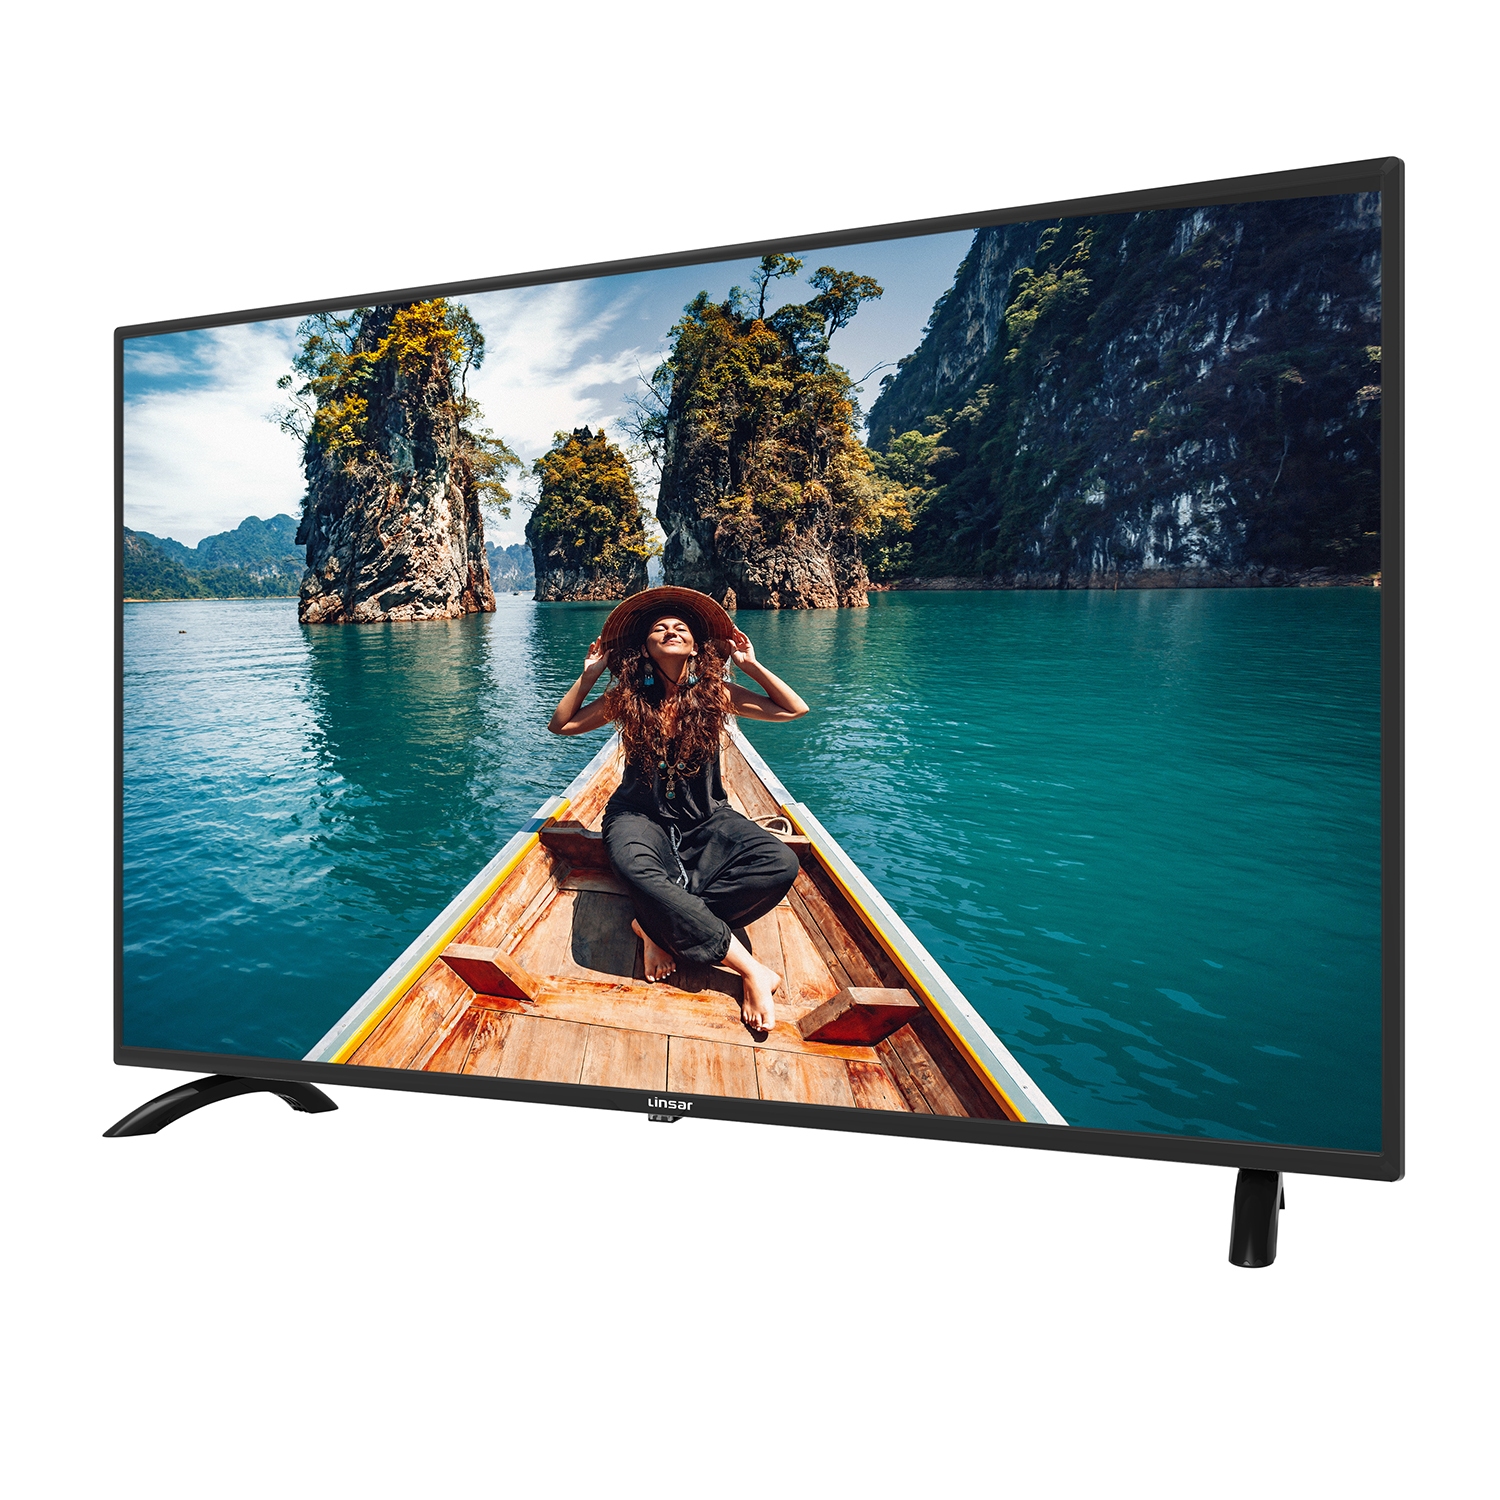 Linsar GT43LUXE 43" Full HD TV - Freeview Play and USB Record/Playback - 1